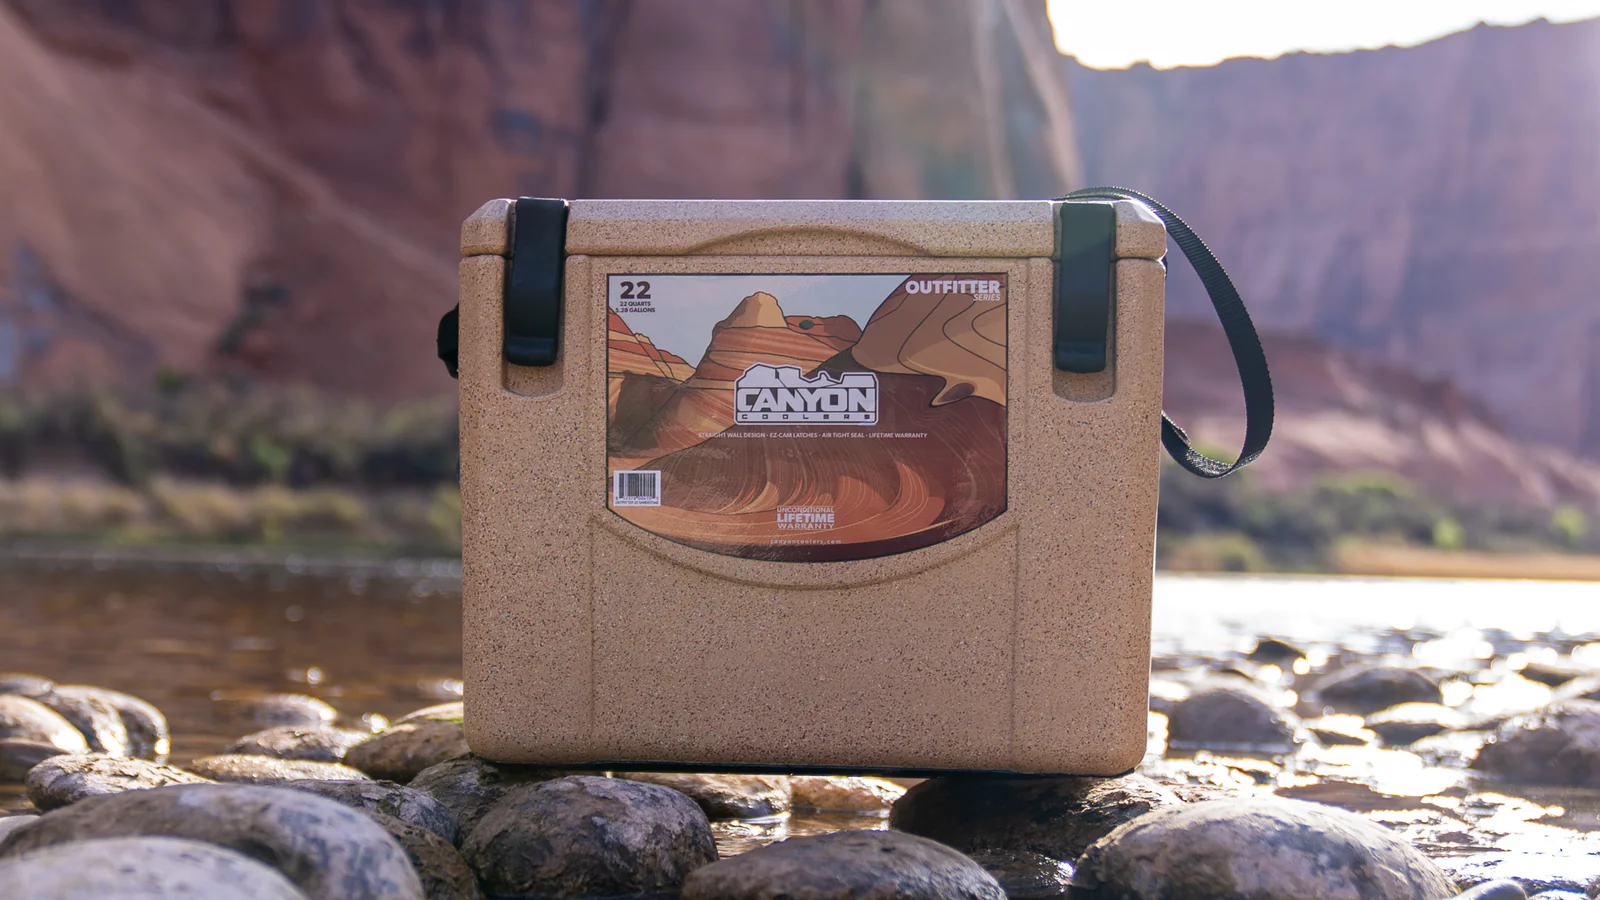 CANYON COOLERS （キャニオンクーラーズ）クーラーボックス OUTFITTER ...